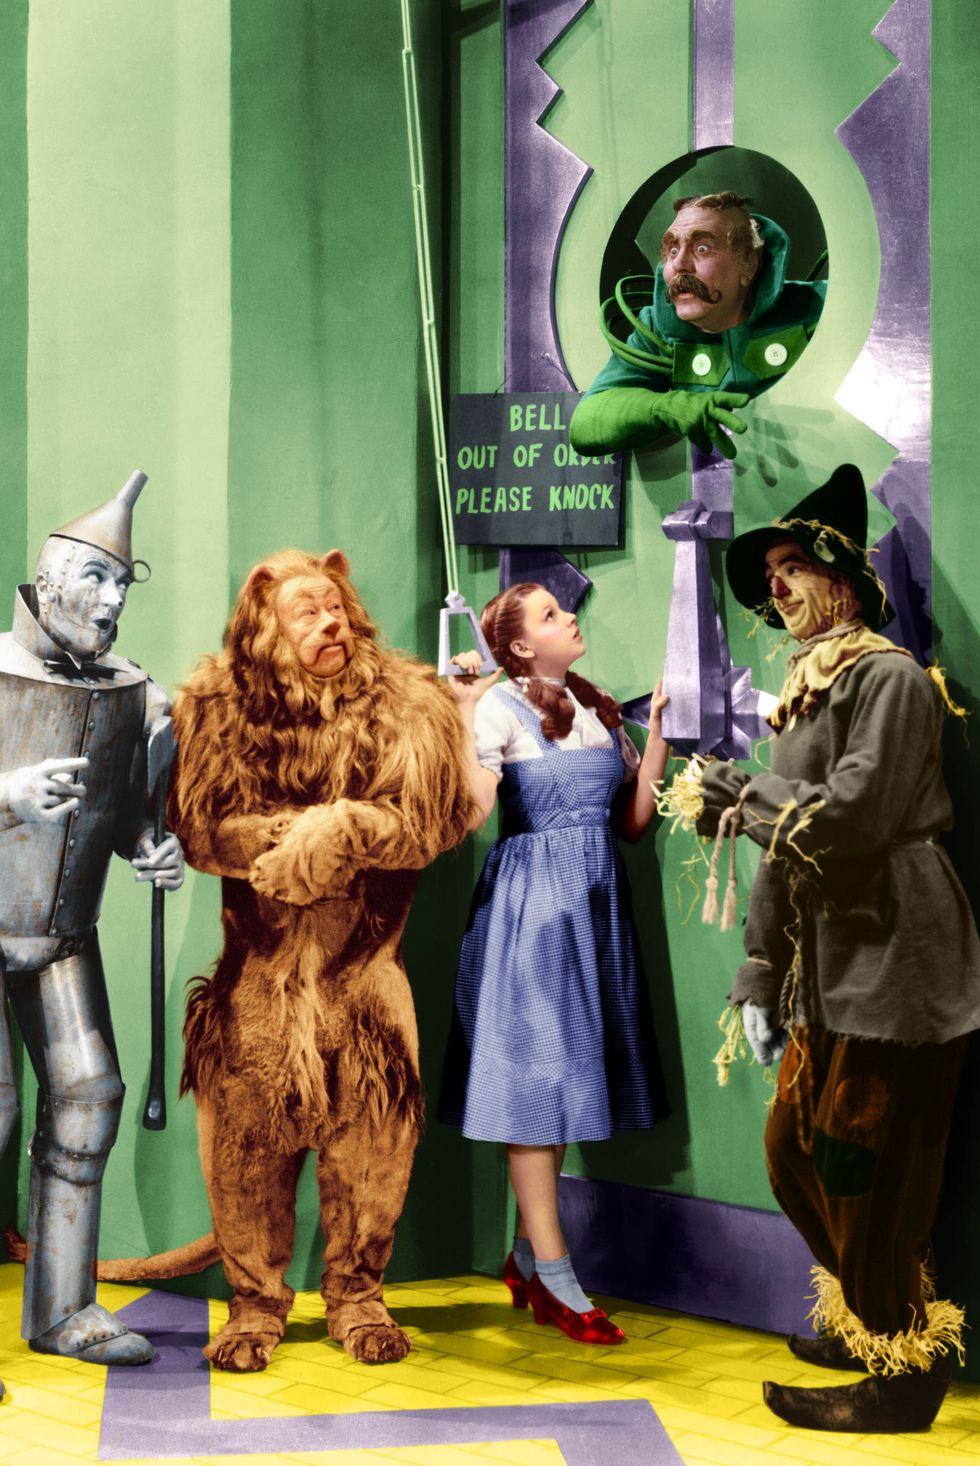 Jack Haley (1898 - 1979) as the Tin Man, Bert Lahr (1895 - 1967) as the Cowardly Lion, Judy Garland (1922 - 1969) as Dorothy, Ray Bolger (1904 - 1987) as the Scarecrow and Frank Morgan (1890 - 1949) as the Doorman to the Emerald City in 'The Wizard of Oz', 1939.